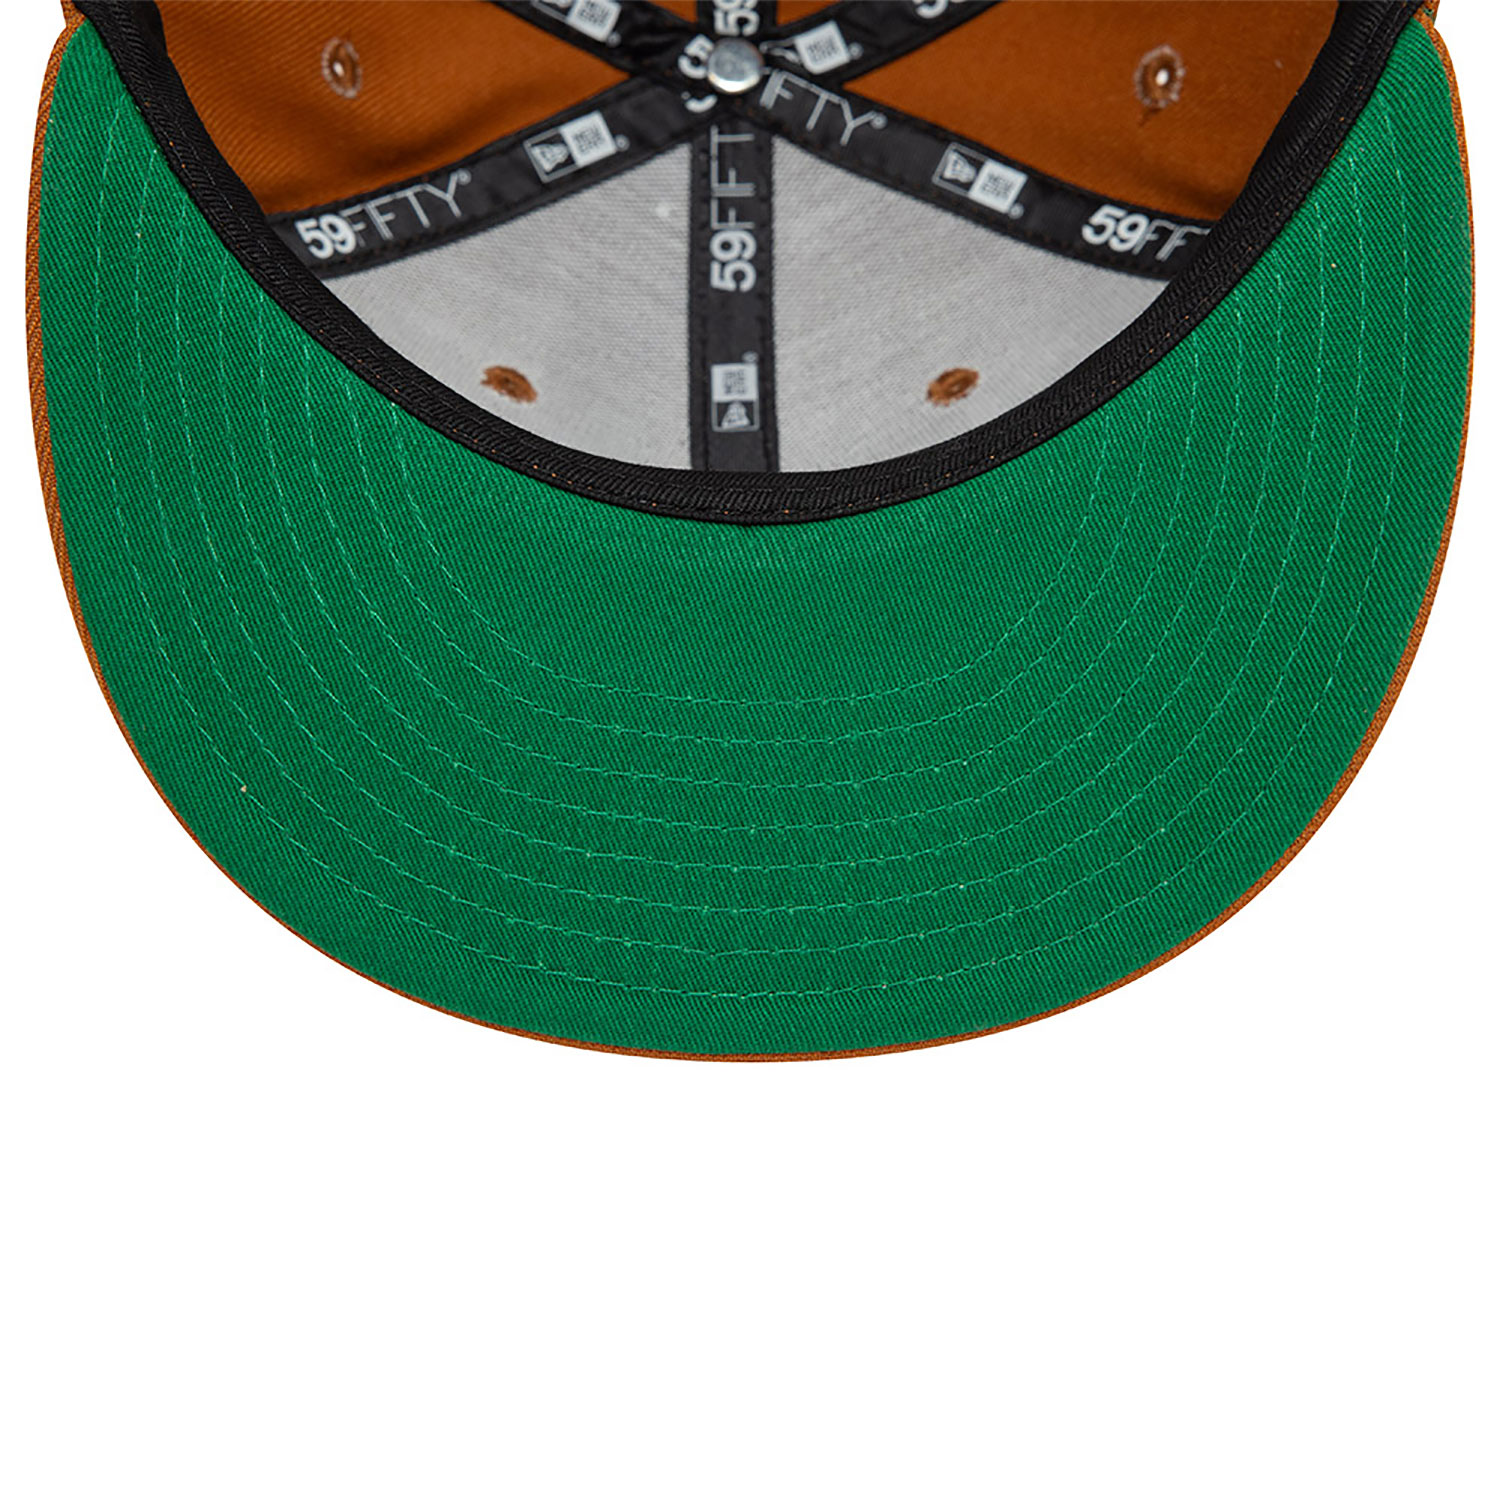 New Era Essential Brown 59FIFTY Fitted Cap